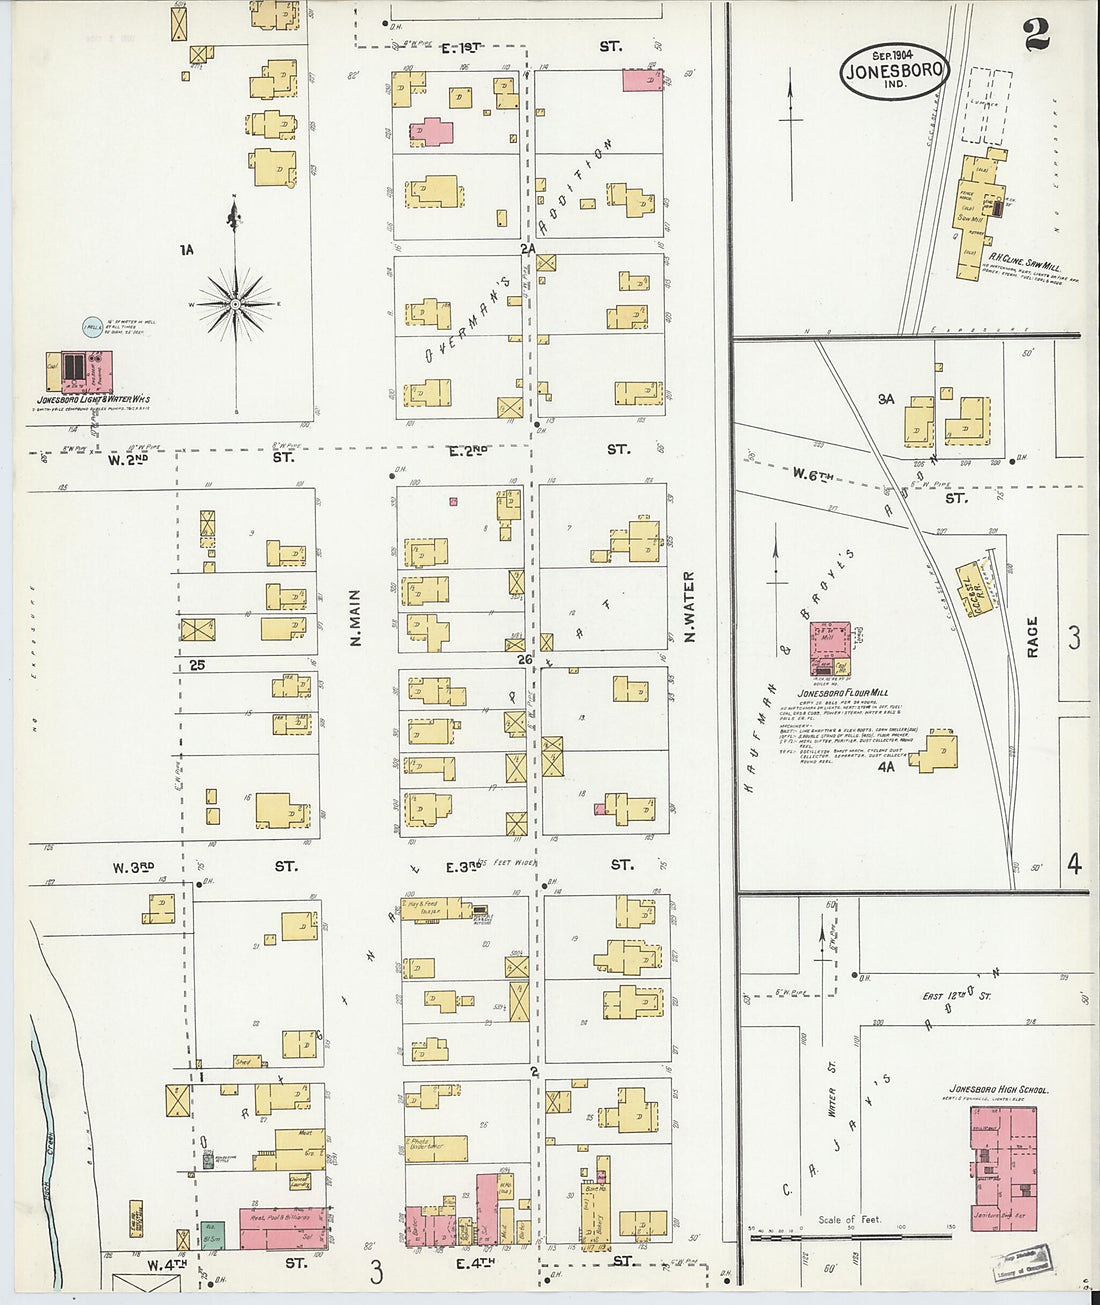 This old map of Jonesboro, Grant County, Indiana was created by Sanborn Map Company in 1904